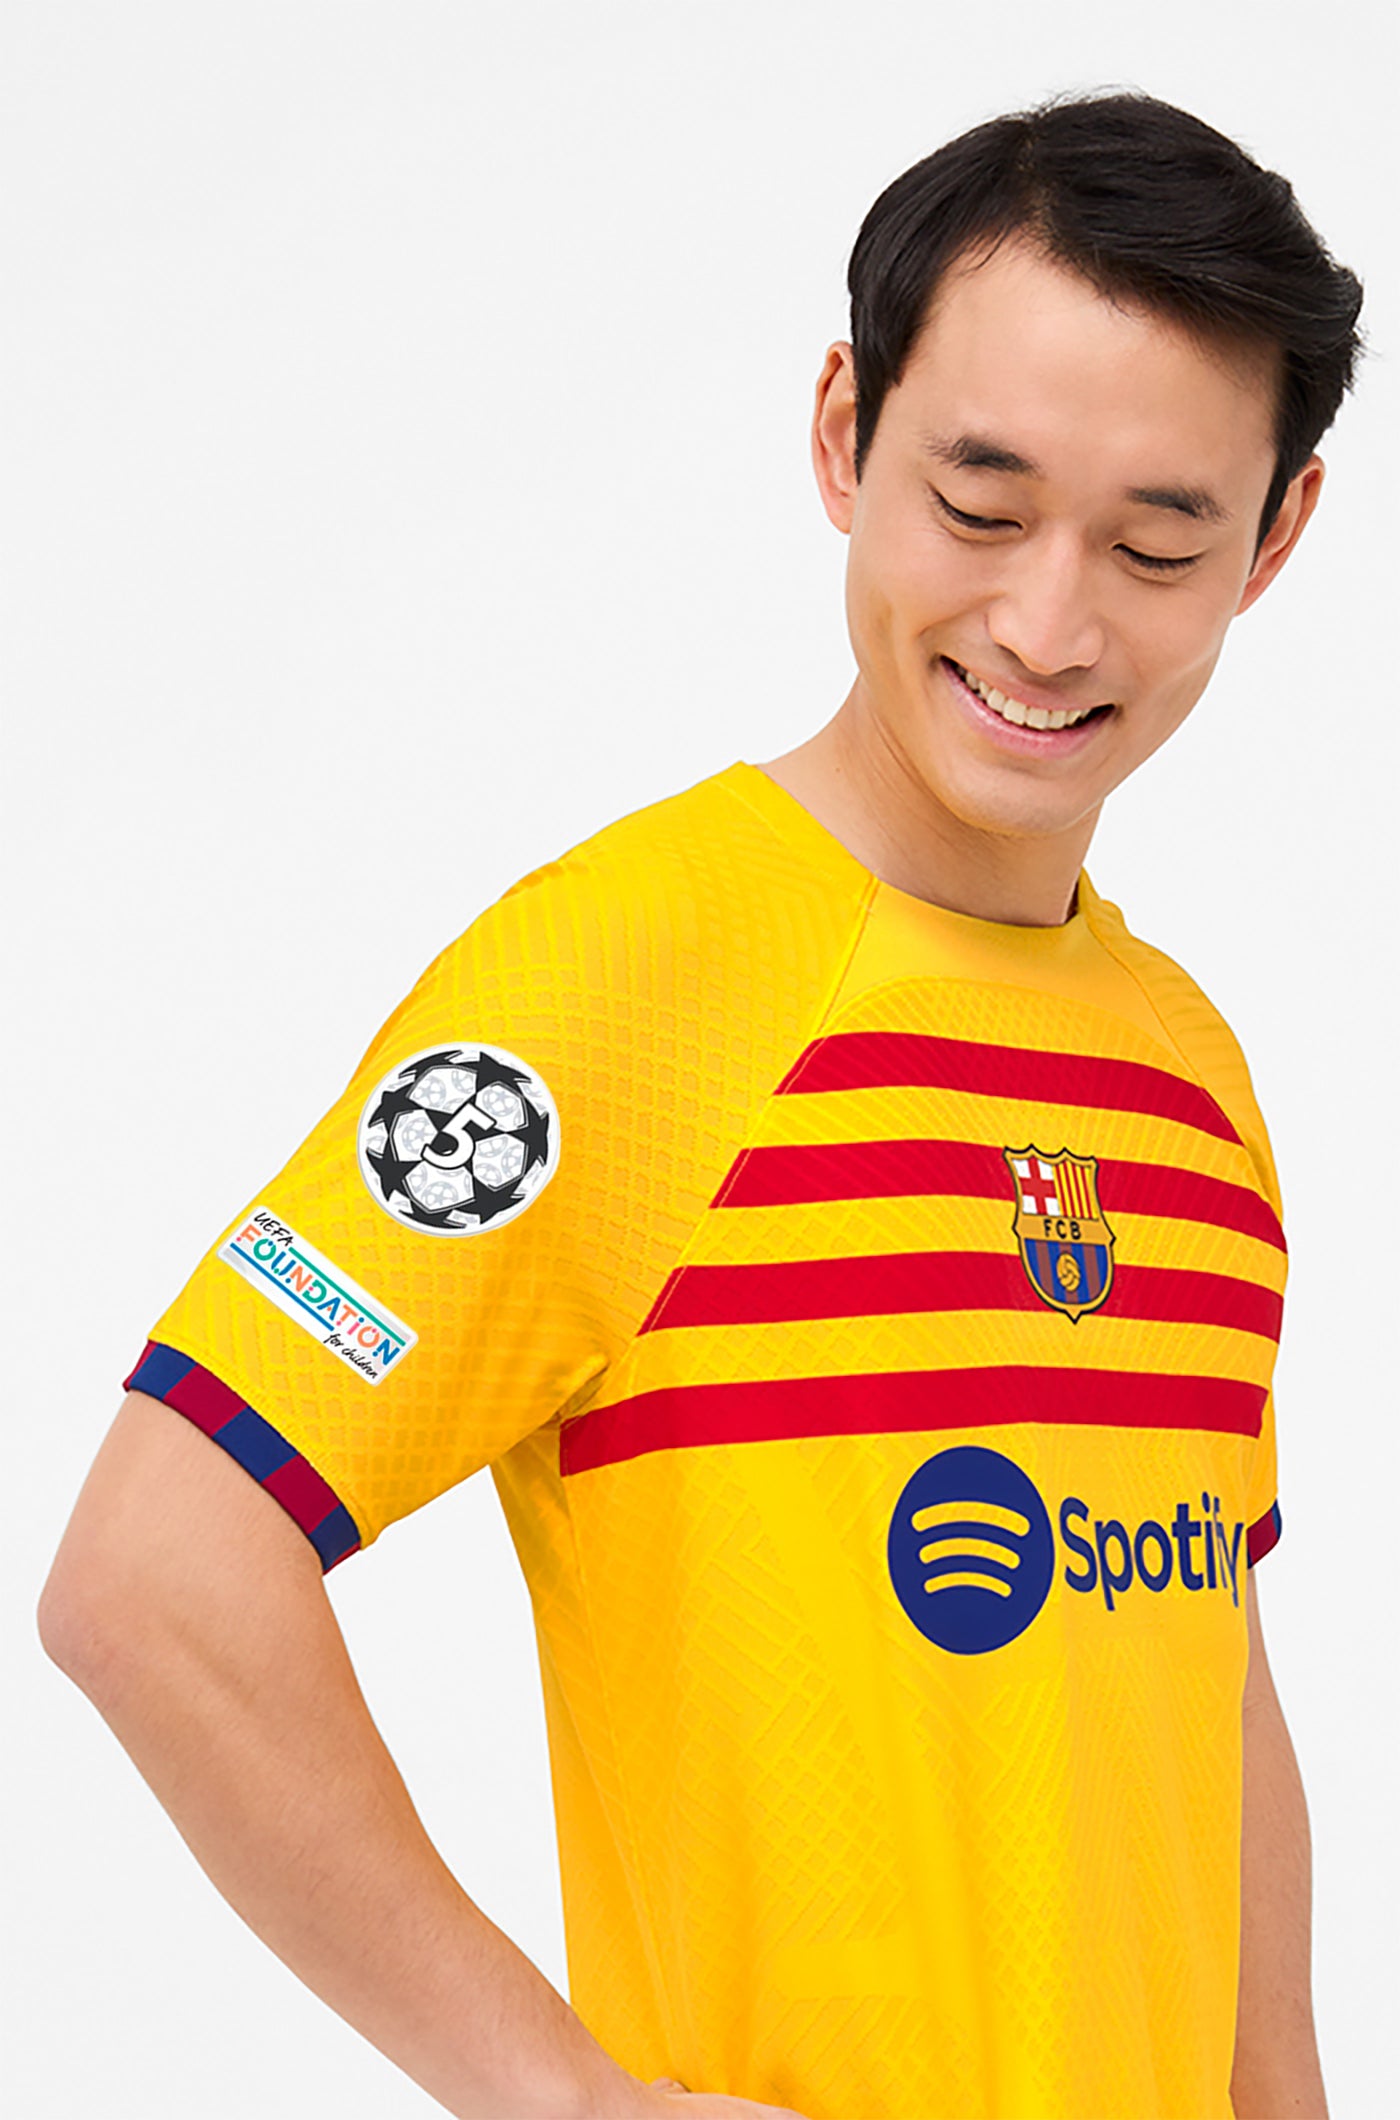 UCL FC Barcelona fourth shirt 23/24 Player’s Edition - KOUNDE